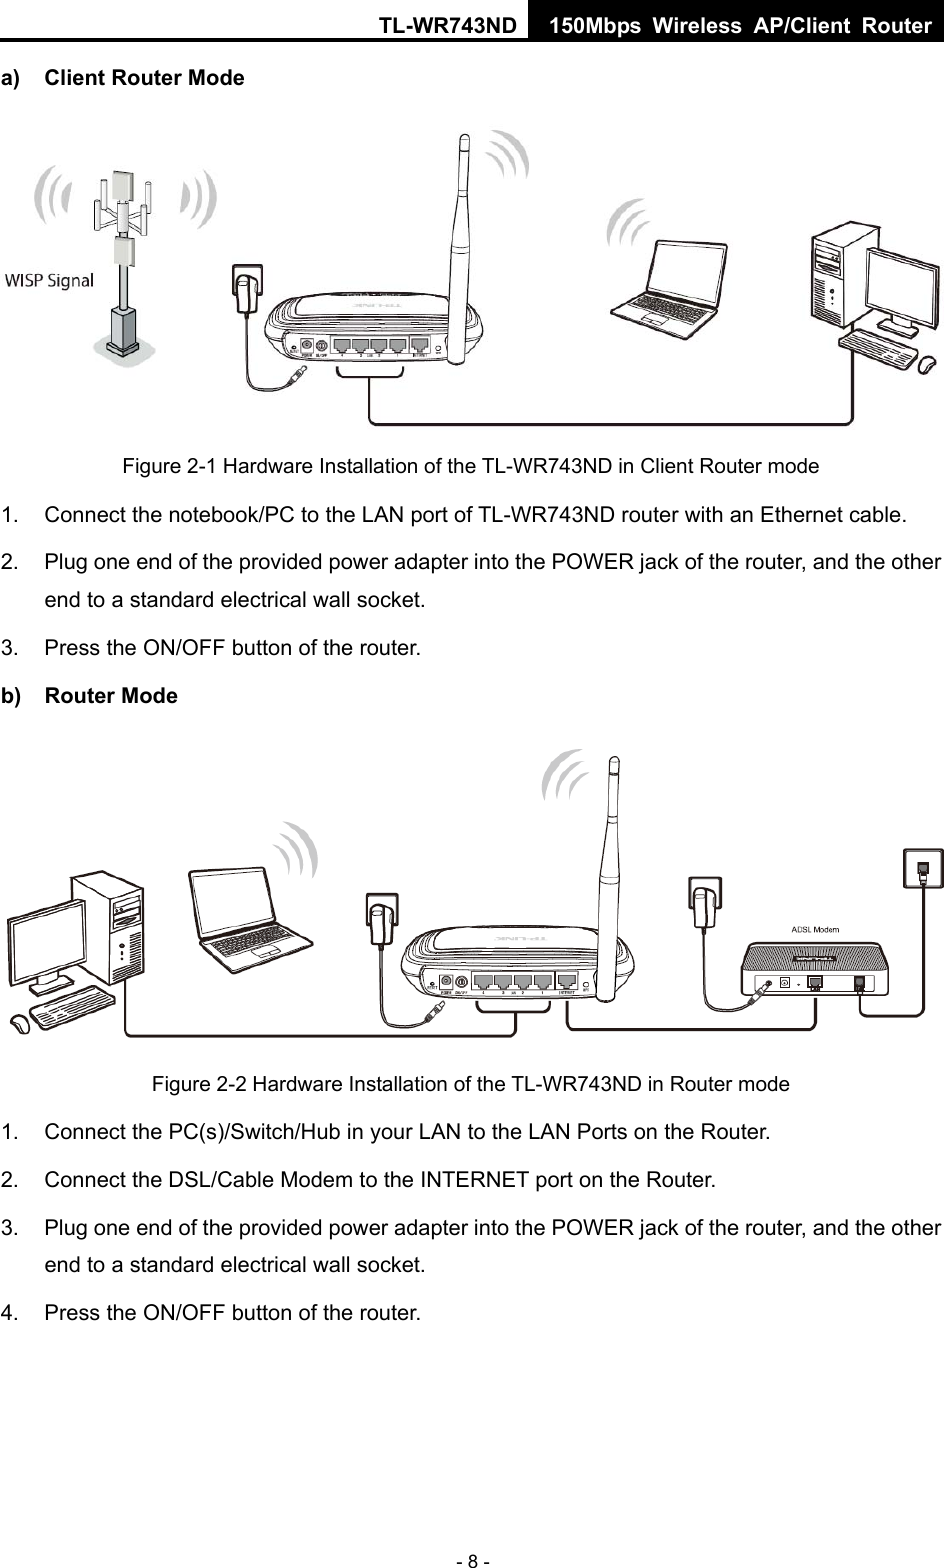 TL-WR743ND 150Mbps Wireless AP/Client Router - 8 - a)  Client Router Mode  Figure 2-1 Hardware Installation of the TL-WR743ND in Client Router mode 1.  Connect the notebook/PC to the LAN port of TL-WR743ND router with an Ethernet cable. 2.  Plug one end of the provided power adapter into the POWER jack of the router, and the other end to a standard electrical wall socket. 3.  Press the ON/OFF button of the router. b) Router Mode  Figure 2-2 Hardware Installation of the TL-WR743ND in Router mode 1.  Connect the PC(s)/Switch/Hub in your LAN to the LAN Ports on the Router. 2.  Connect the DSL/Cable Modem to the INTERNET port on the Router. 3.  Plug one end of the provided power adapter into the POWER jack of the router, and the other end to a standard electrical wall socket.   4.  Press the ON/OFF button of the router. 